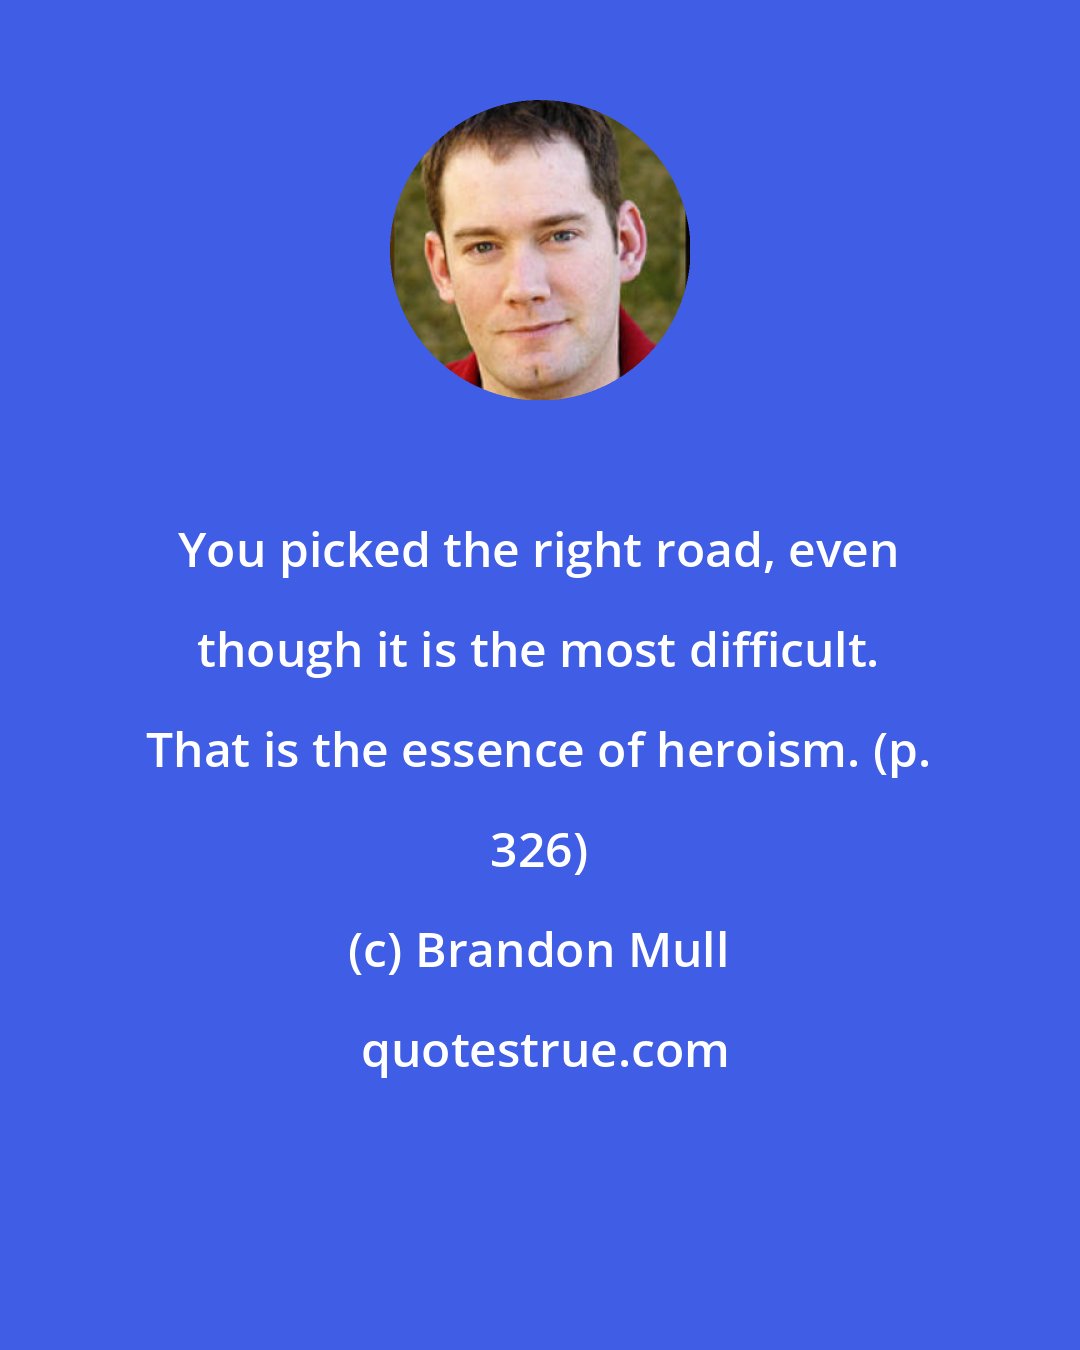 Brandon Mull: You picked the right road, even though it is the most difficult. That is the essence of heroism. (p. 326)